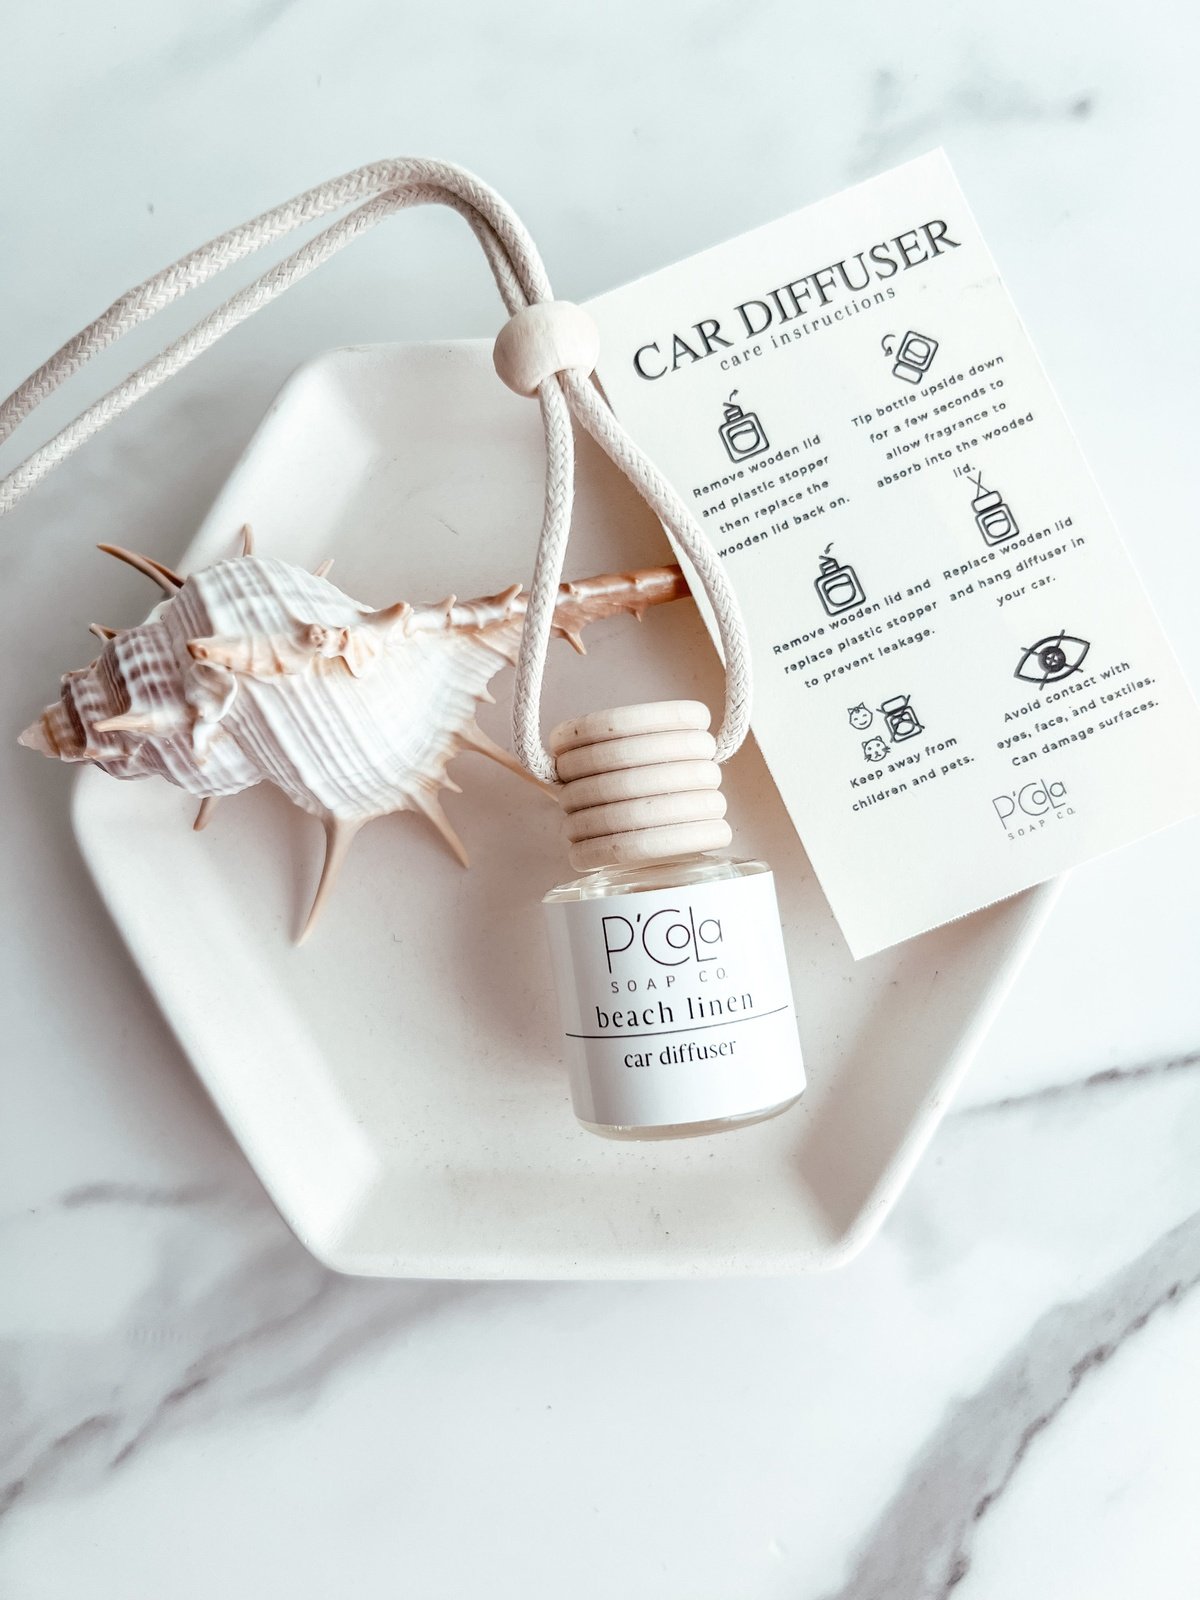 beach linen car diffuser with directions for use